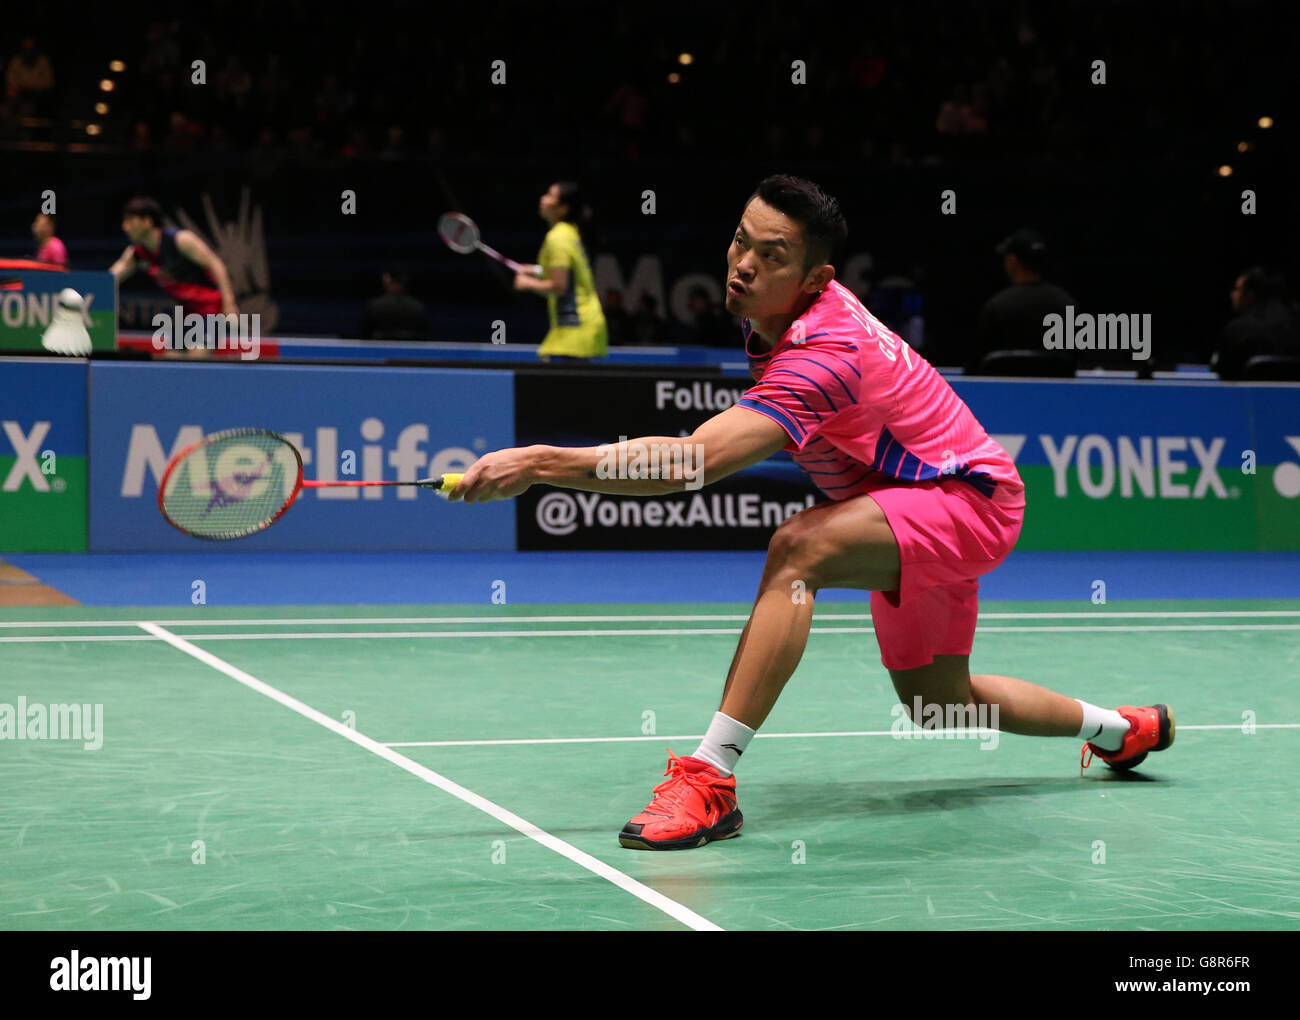 China's Dan Lin during his singles match on day two of the YONEX All England Open Badminton Championships at the Barclaycard Arena, Birmingham. Stock Photo